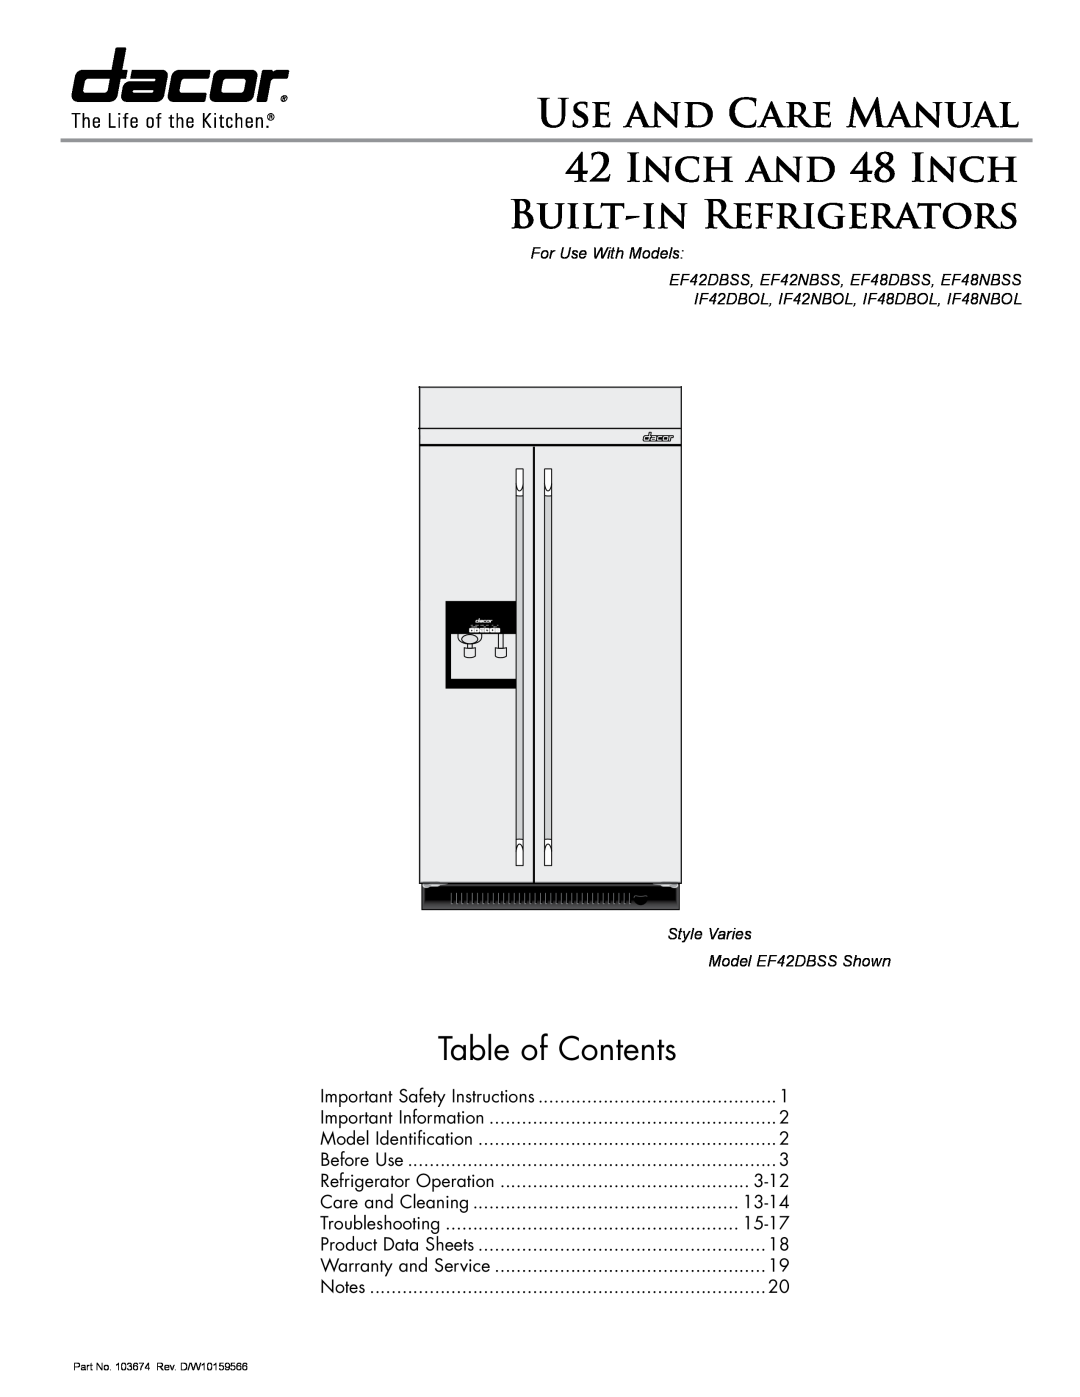 Dacor EF48NBSS important safety instructions Refrigerator Operation, 3-12, Care and Cleaning, 13-14, Troubleshooting 